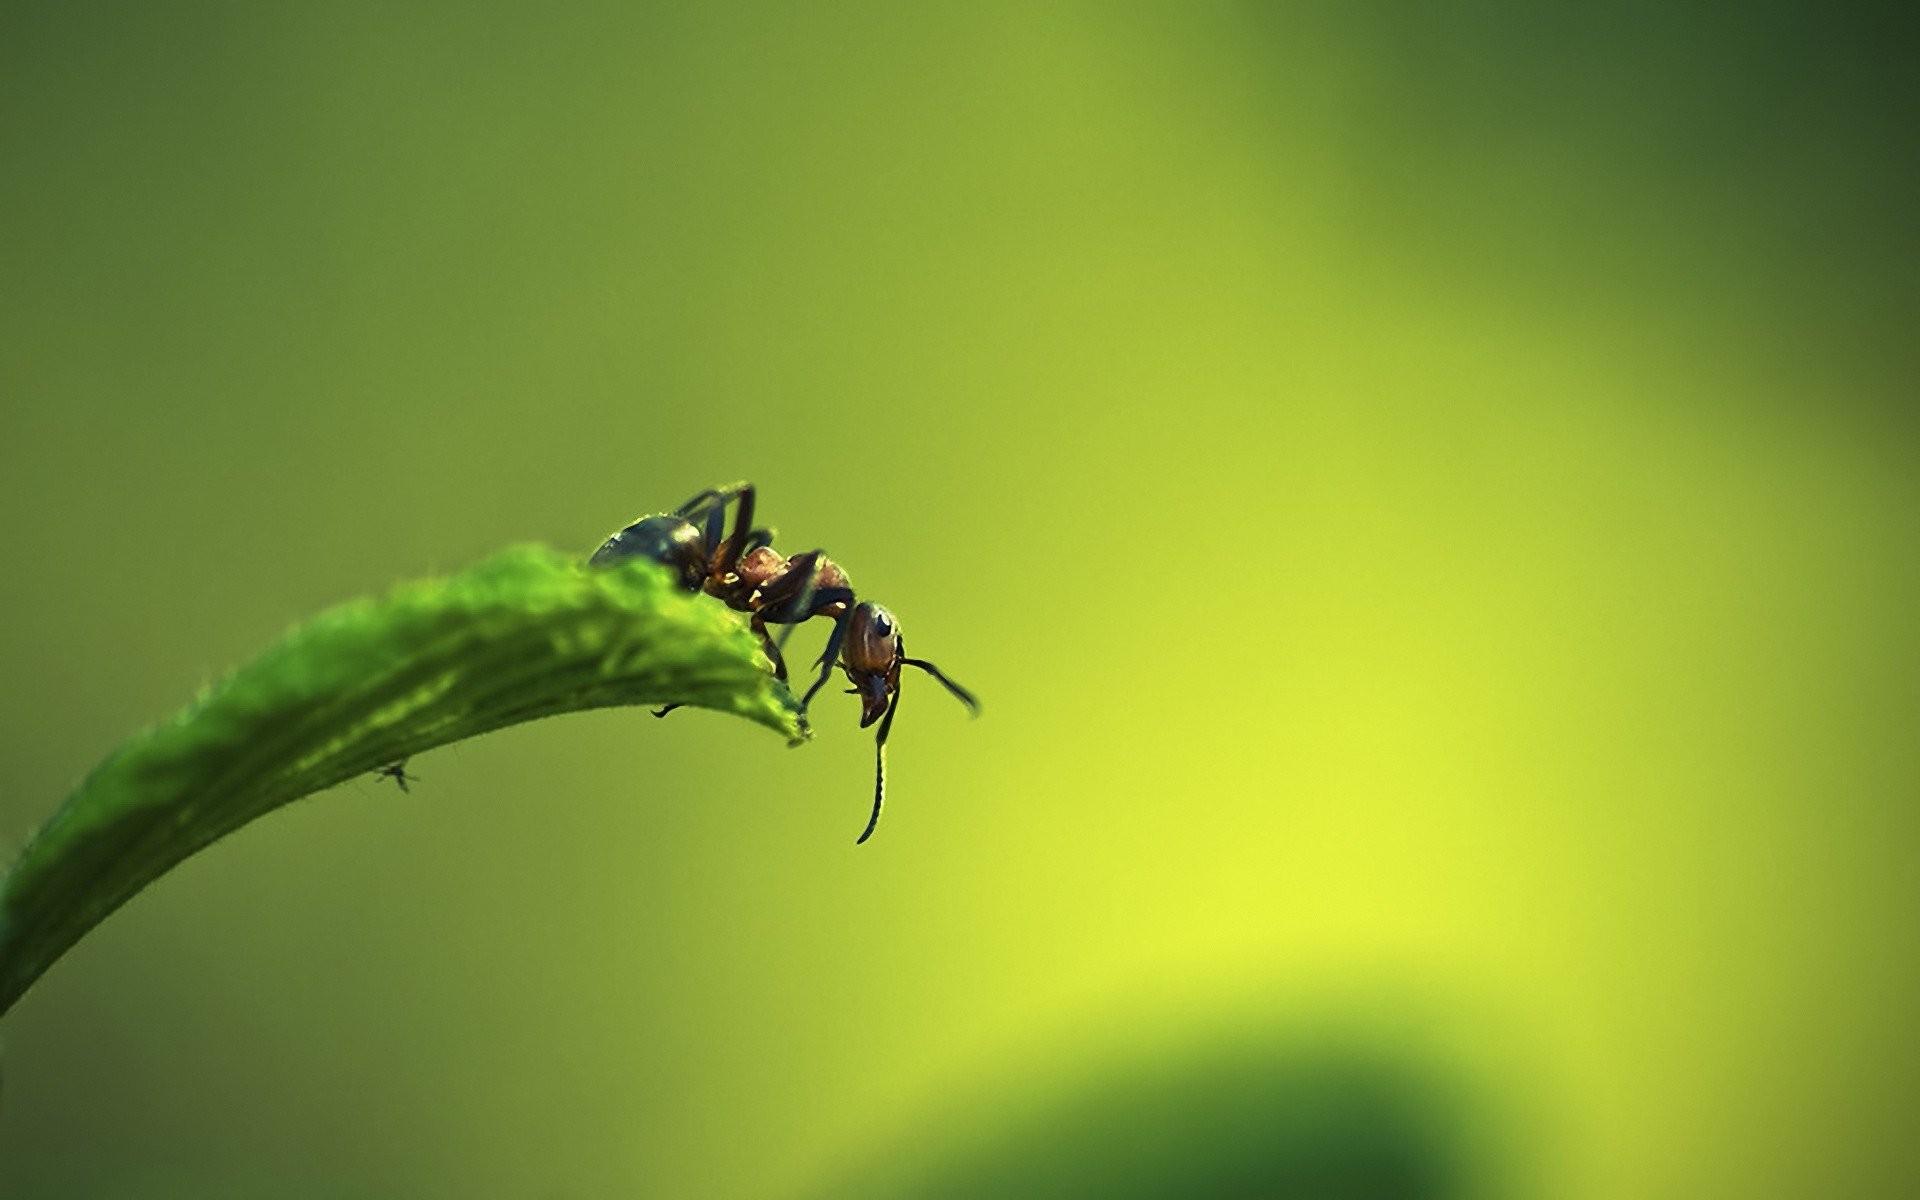 Animals, Of, nature, Field, Insects, HD Wallpaper, Tablet